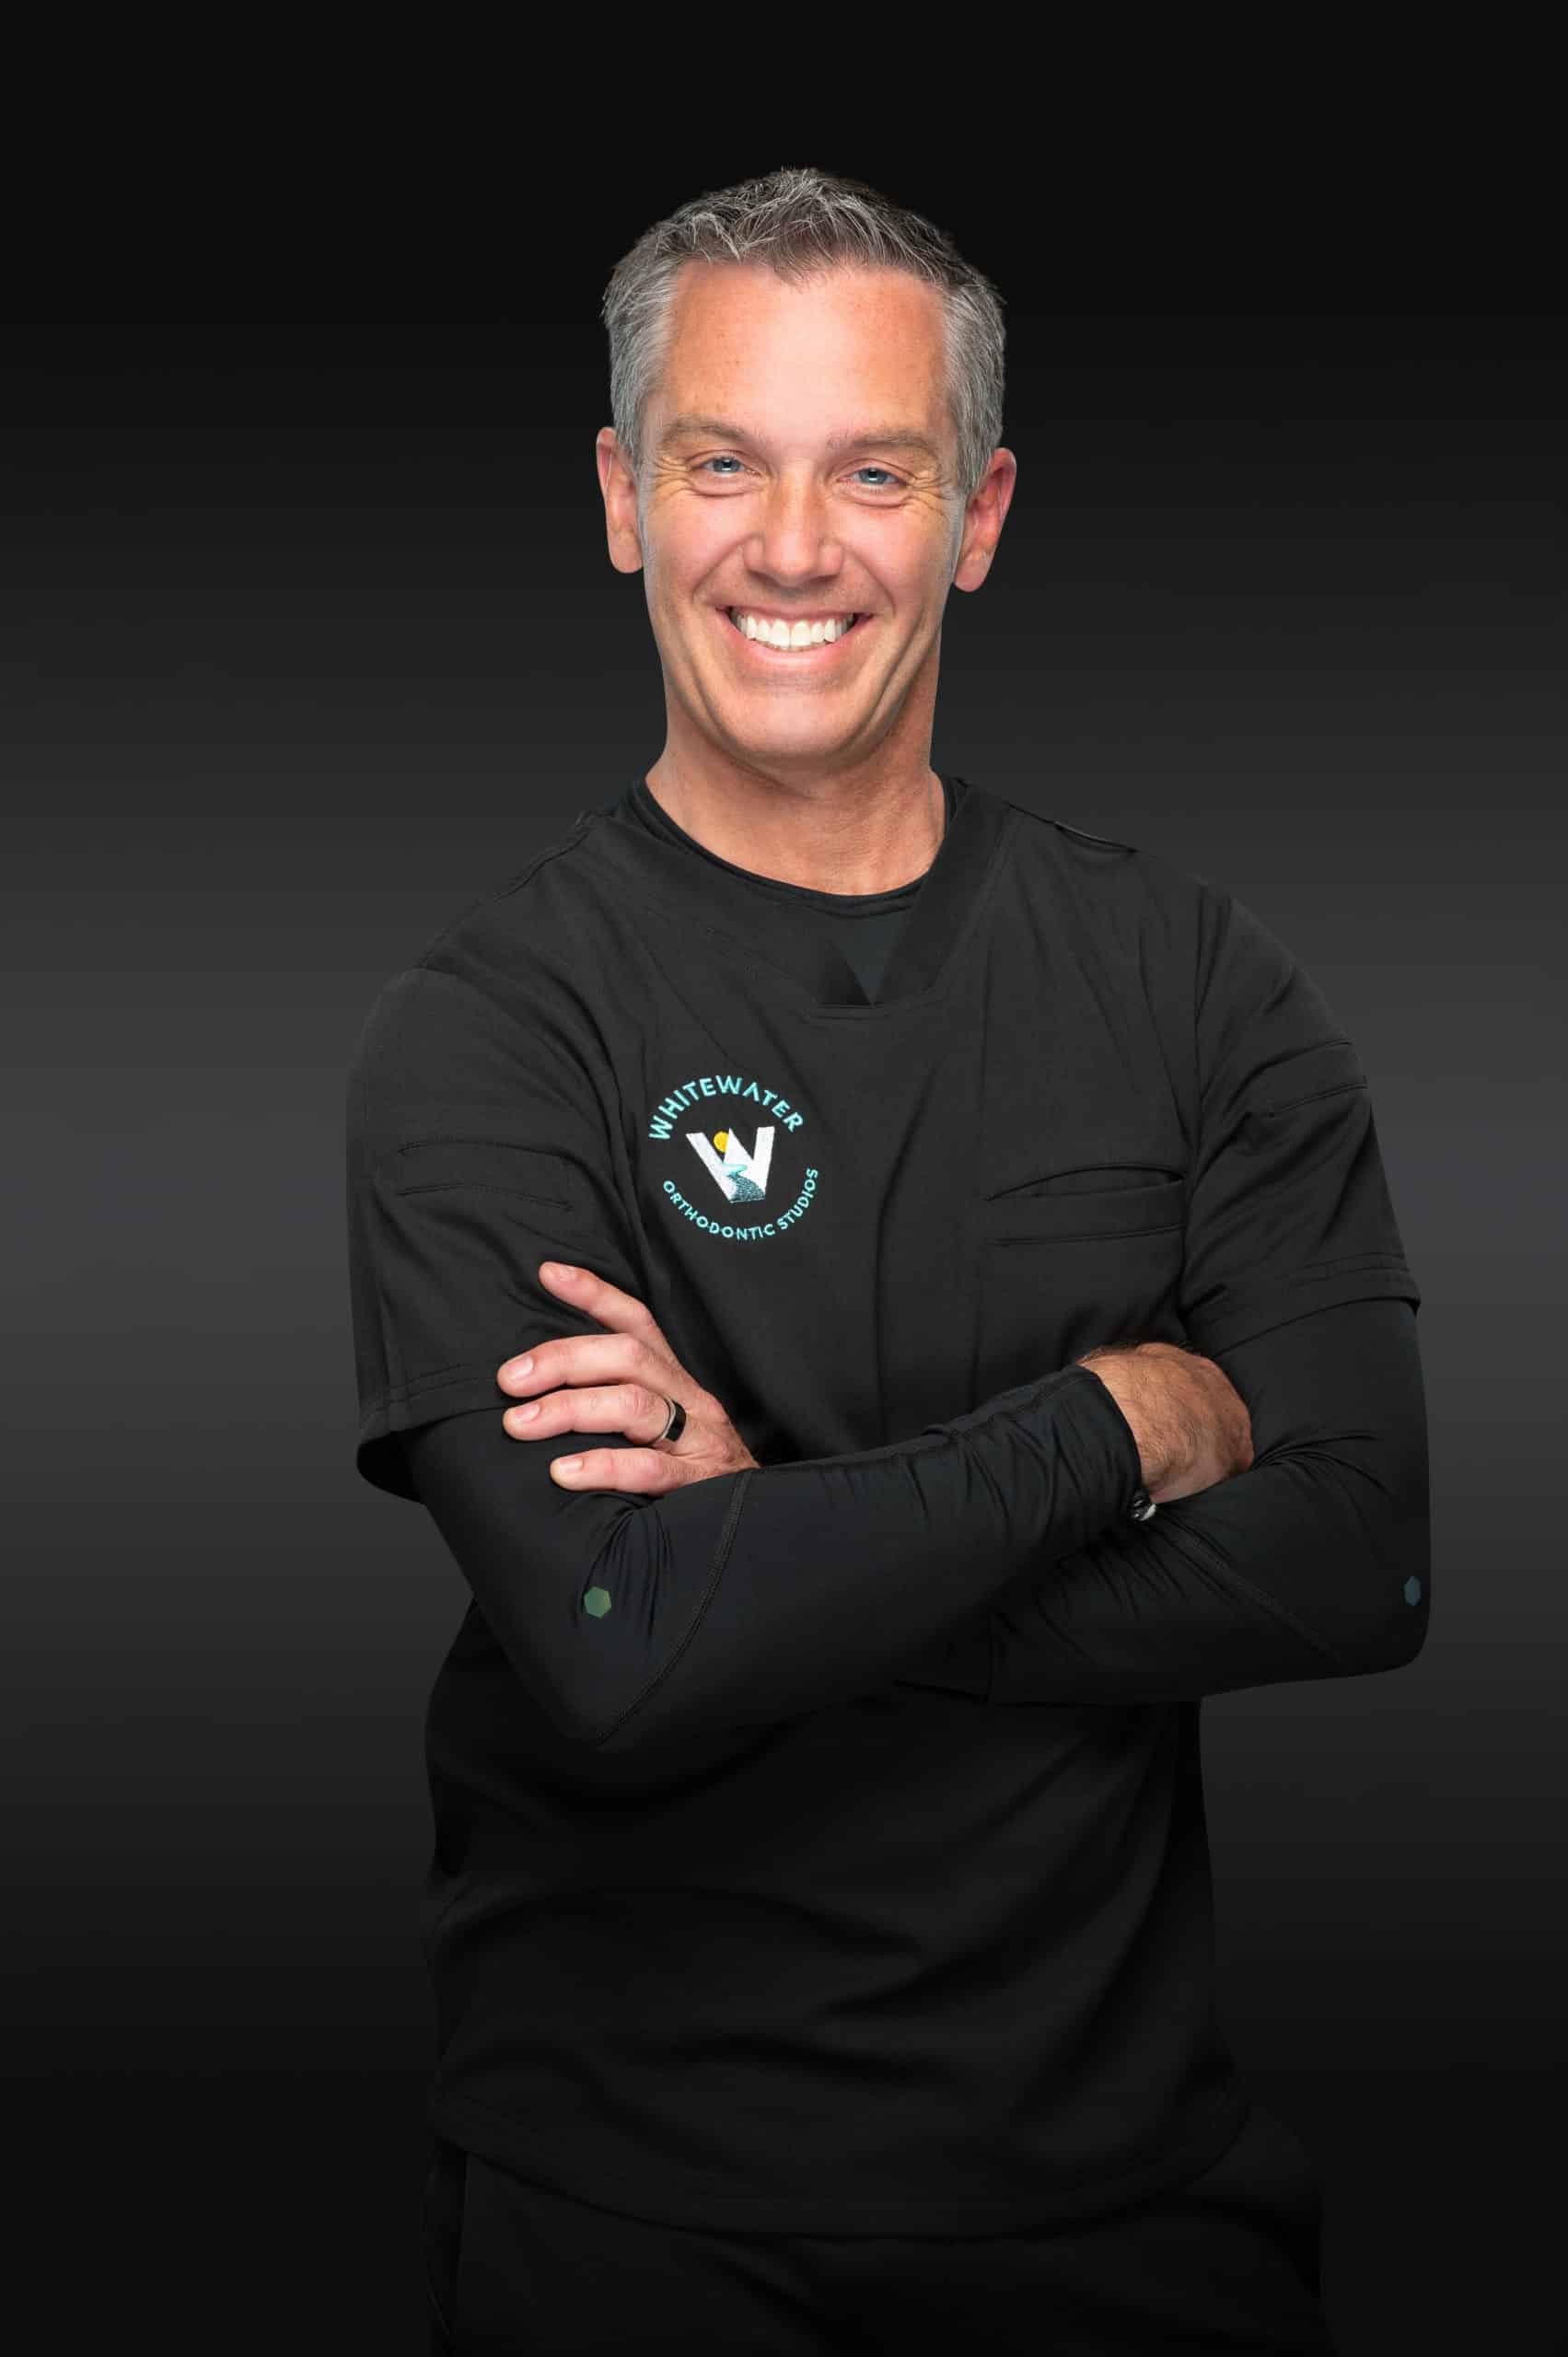 Dr. Leavitt at Whitewater Orthodontic Studios in Yelm and Tacoma, WA